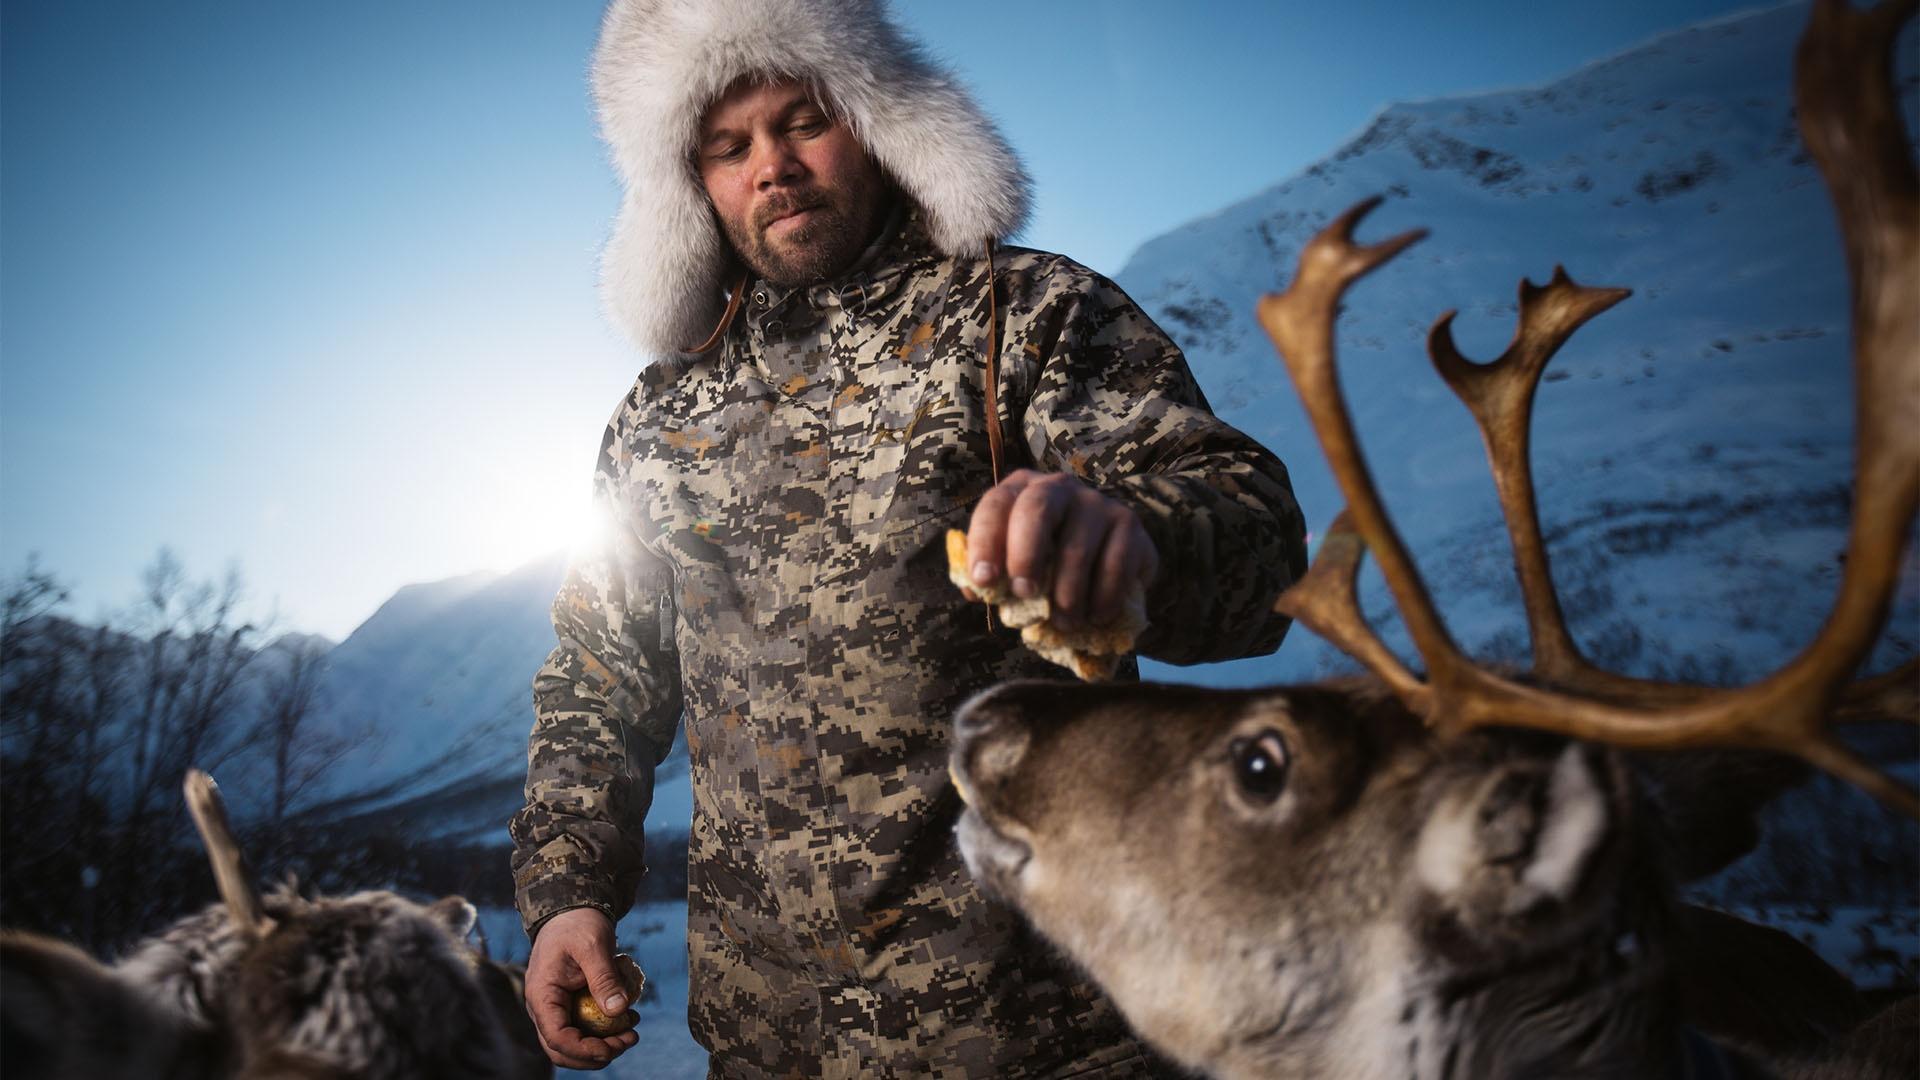 Nils Ole Oskal feeds one of his reindeers in the mountains of Northern Norway.